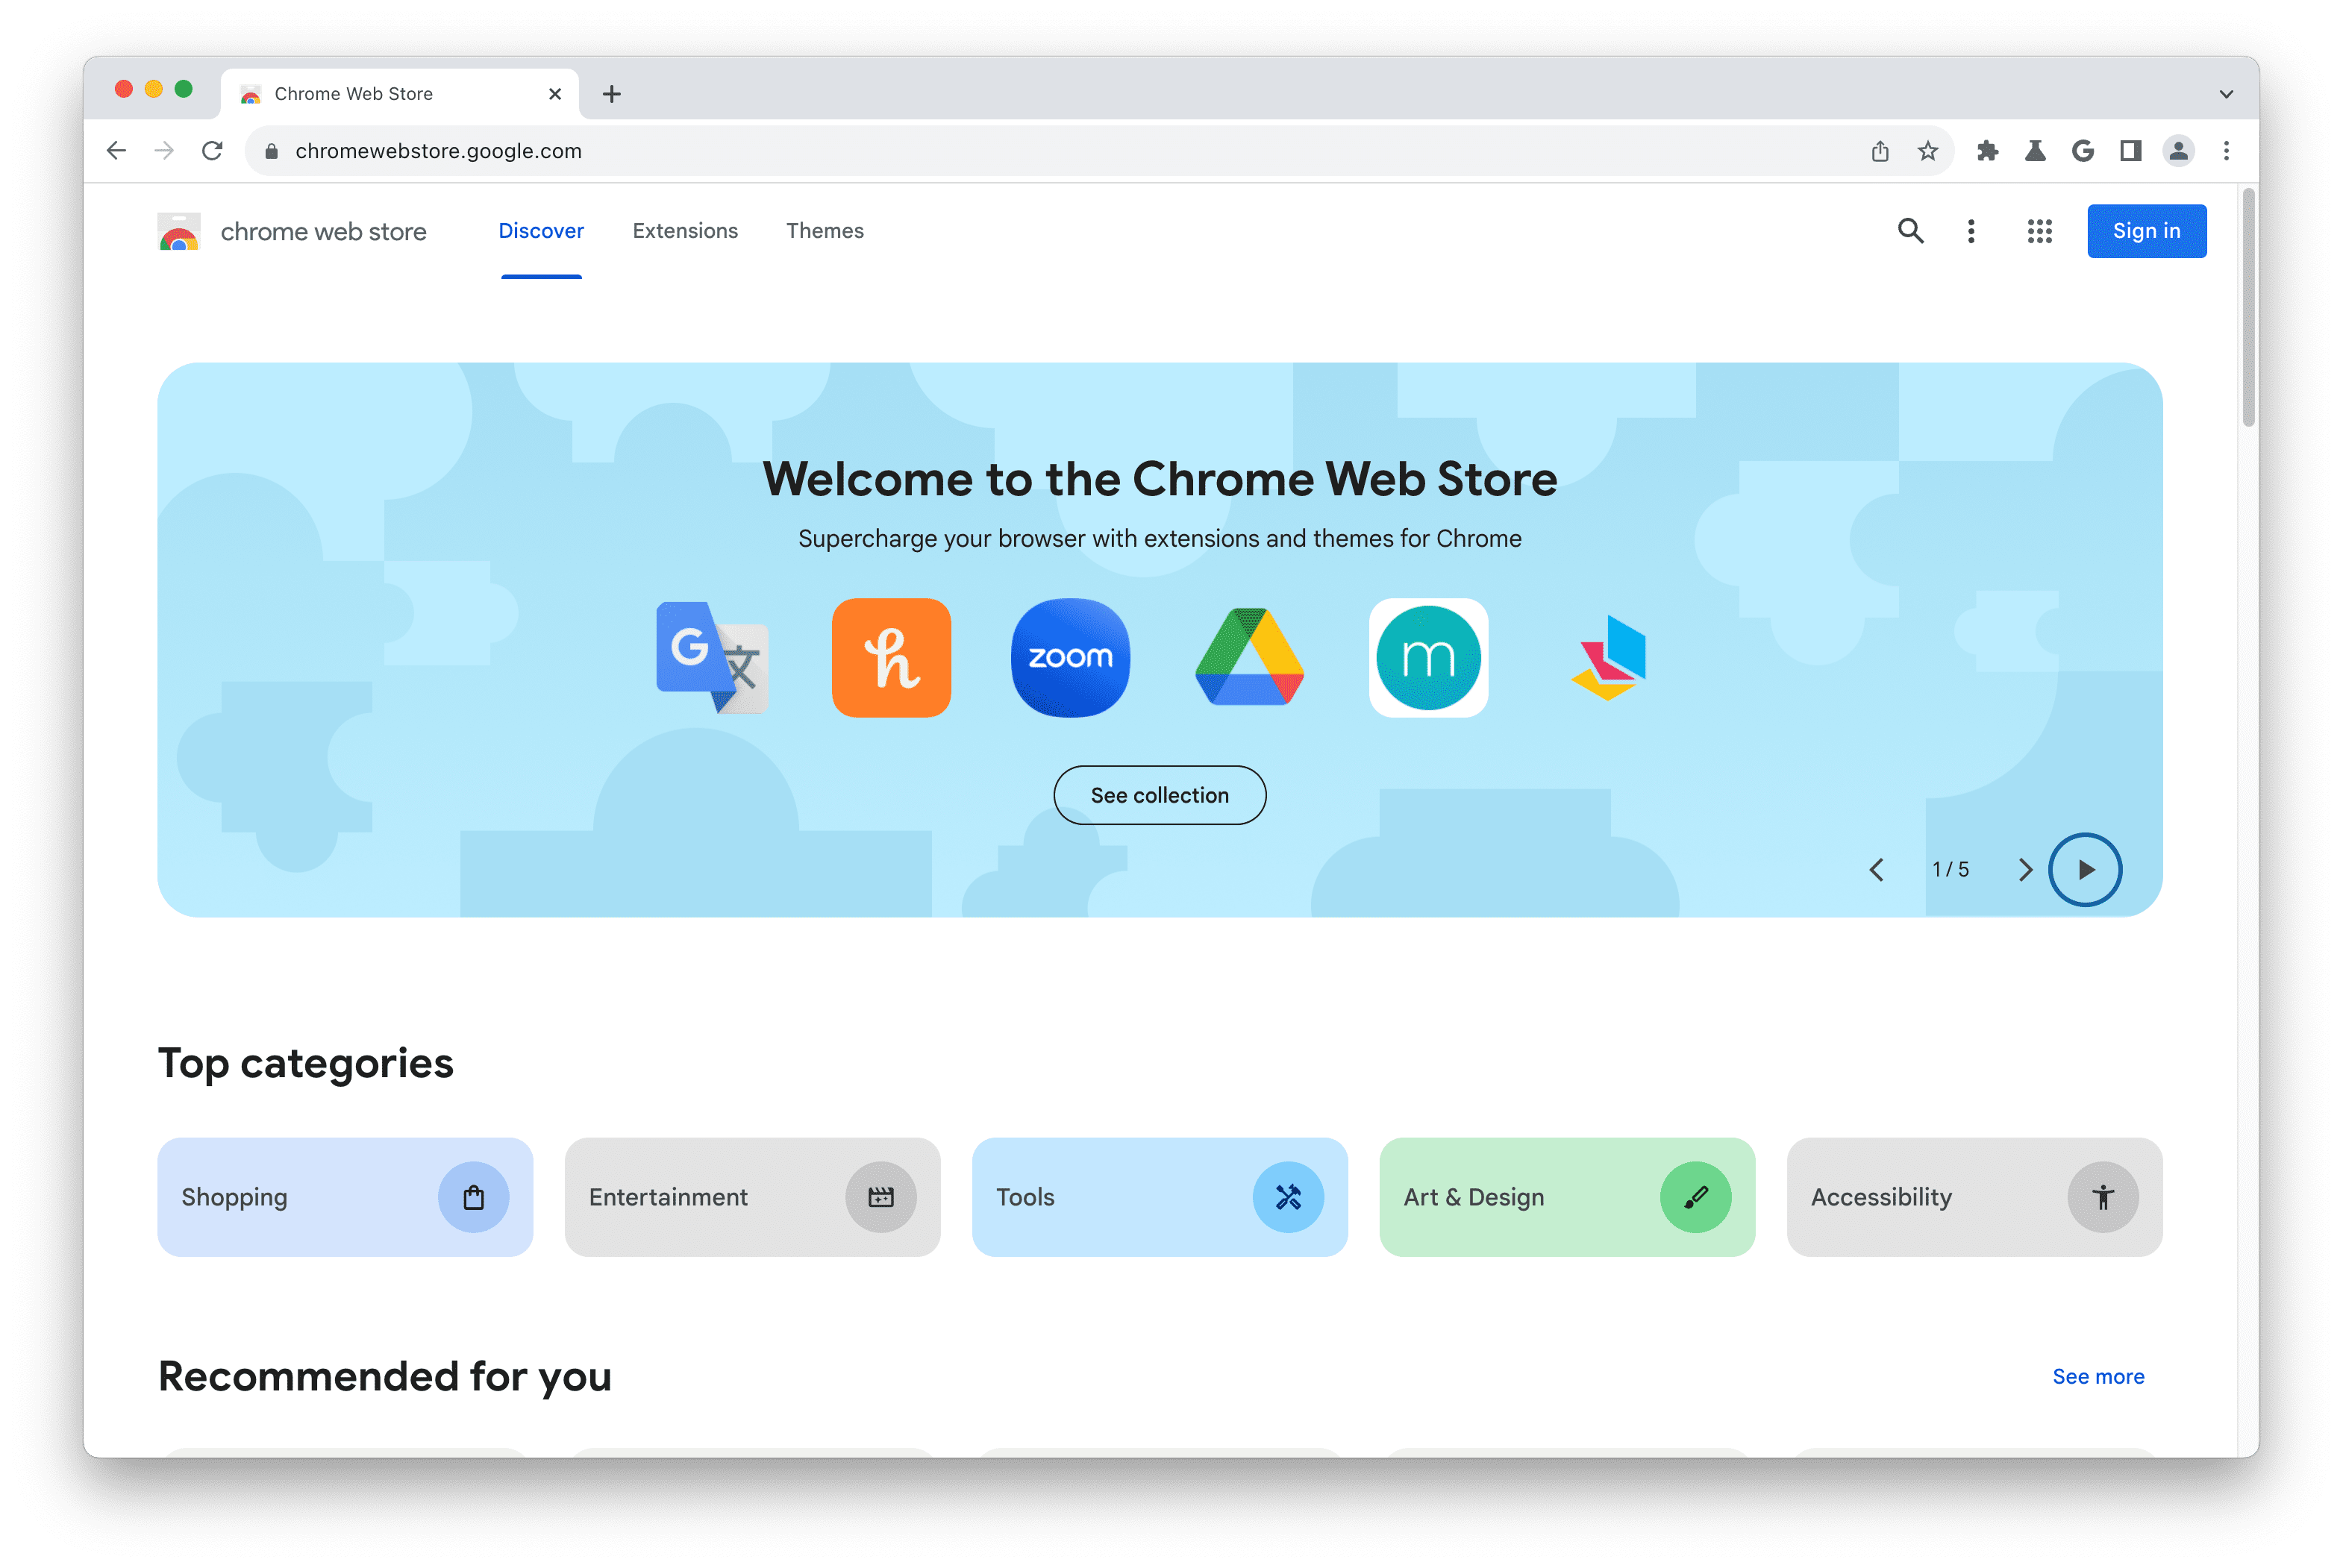 Screenshot of the Chrome Web Store home page.